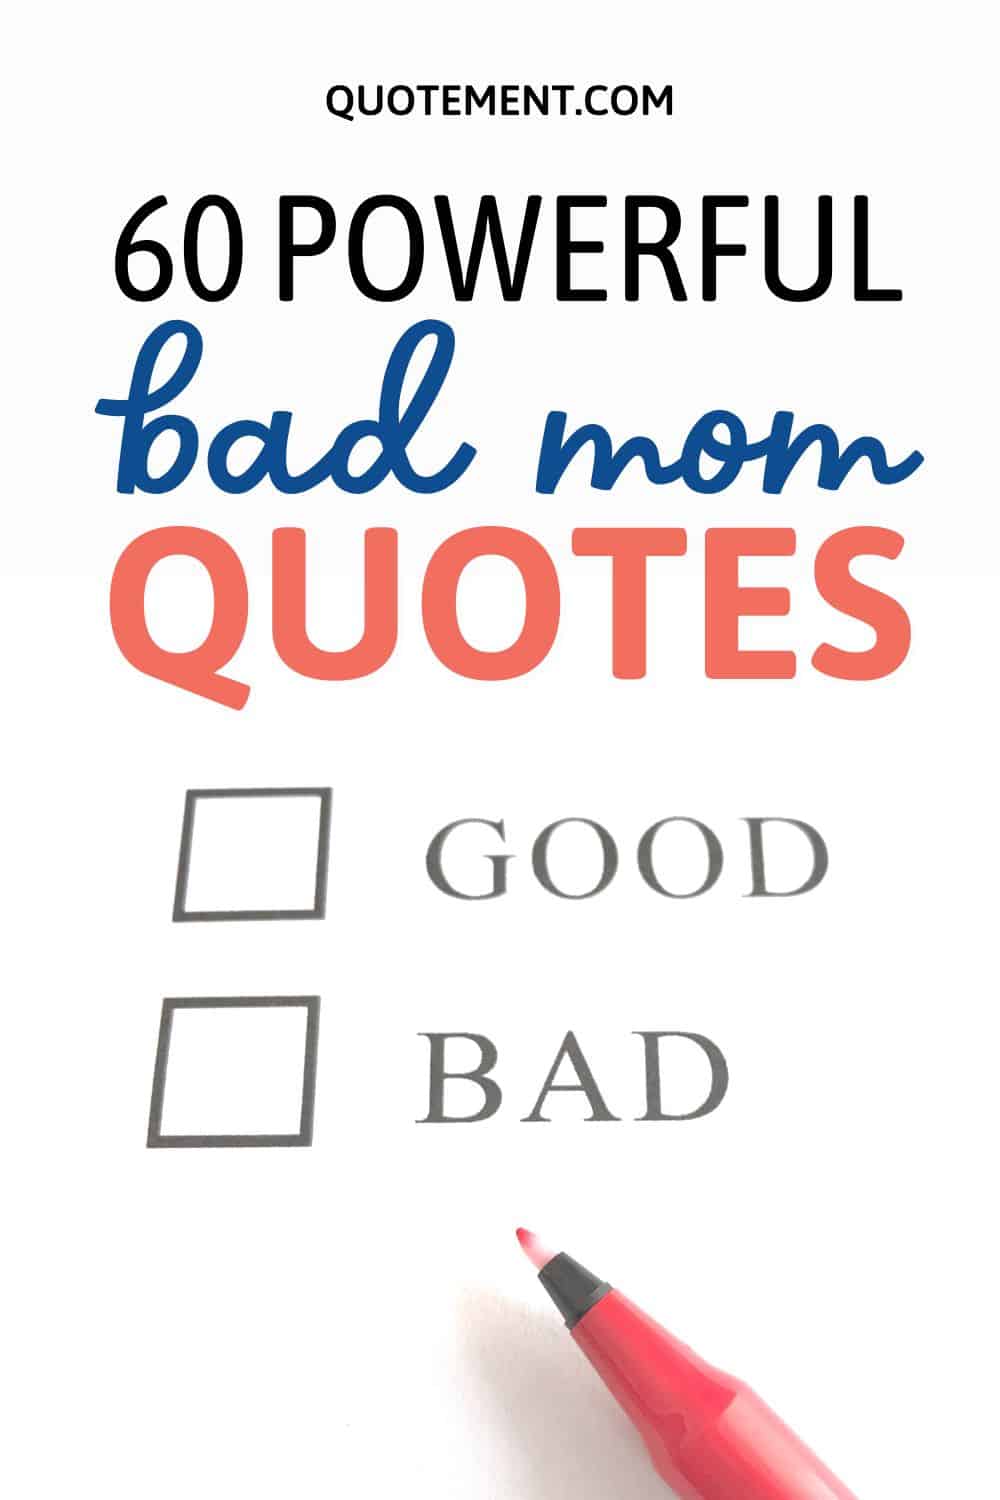 60 Best Bad Mom Quotes To Make Sure You’re A Good One!